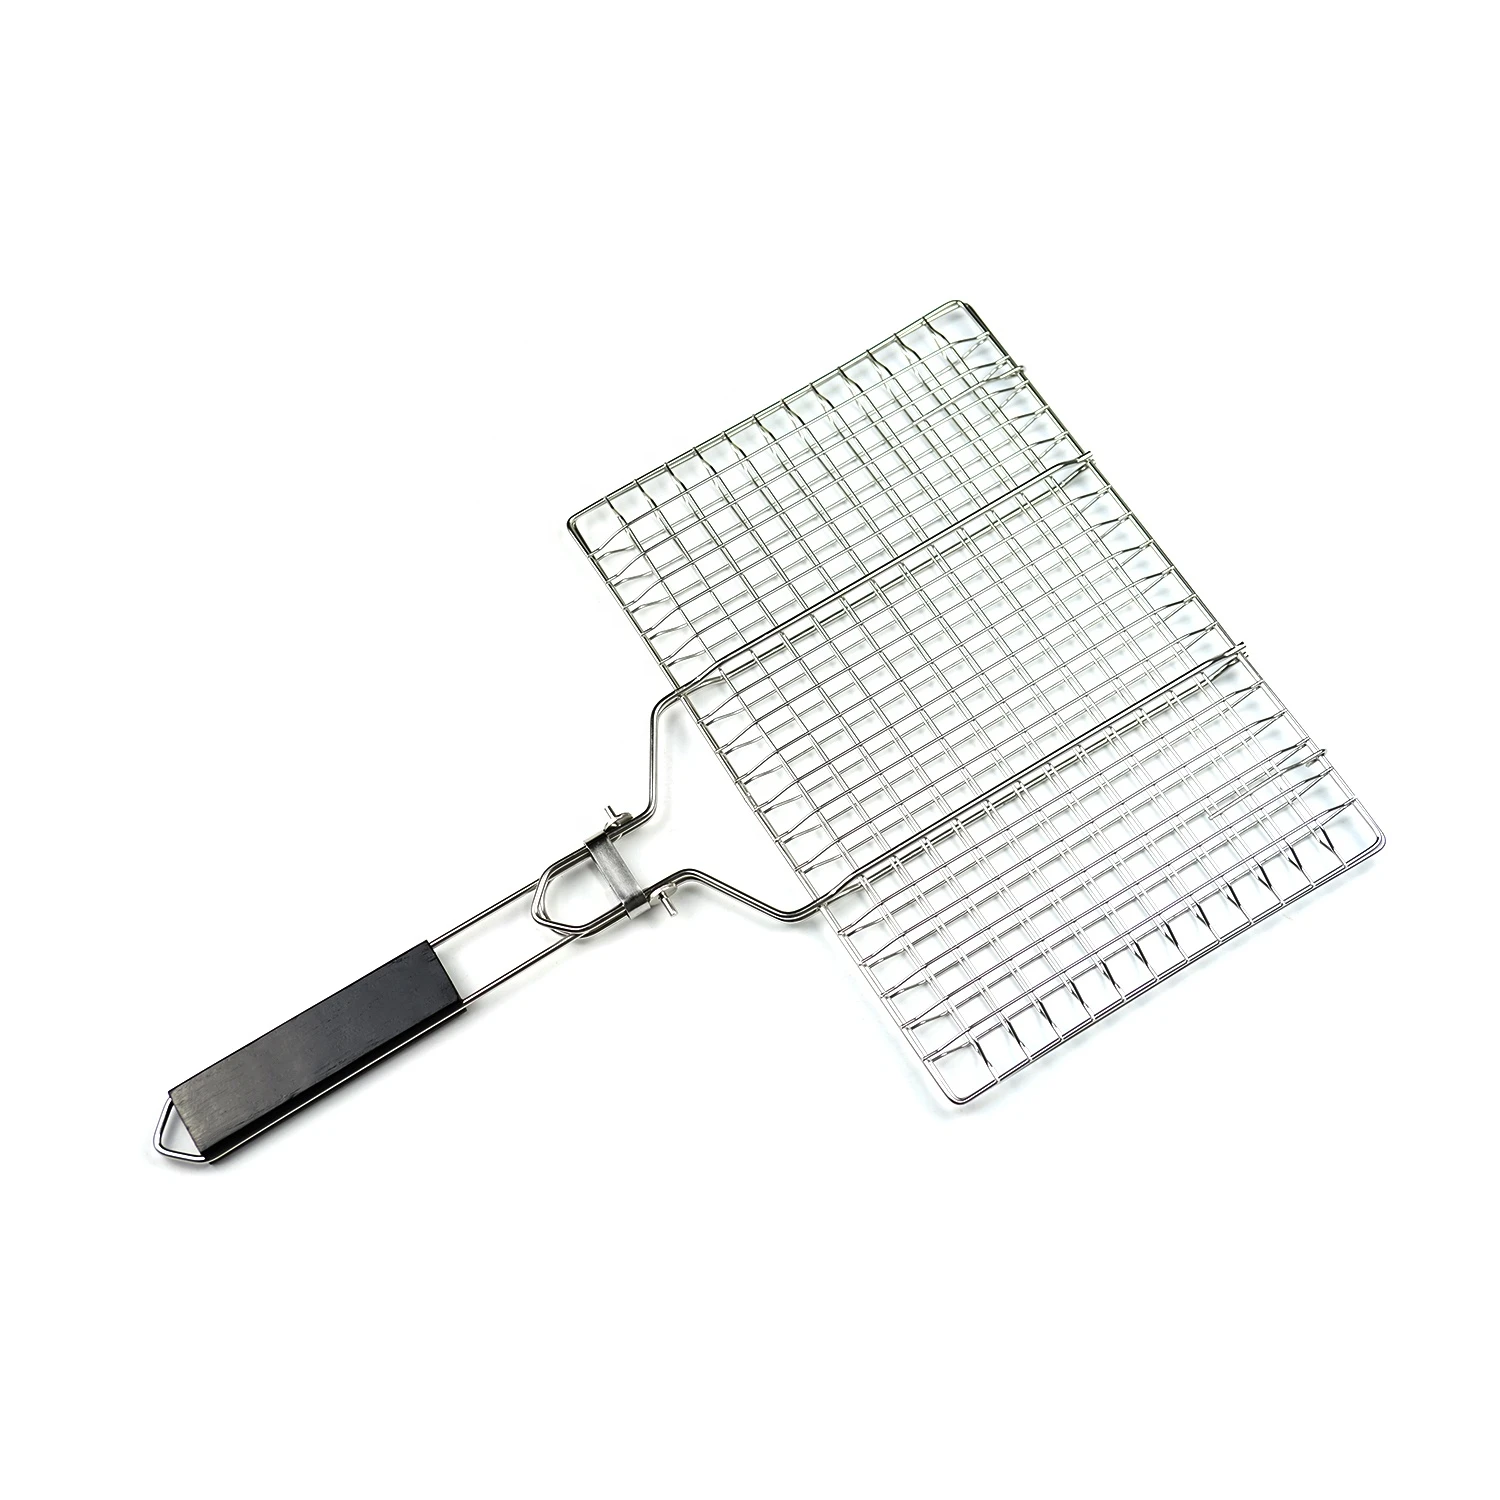 New Product BBQ Tools Clip Net Grilling Basket Barbecue Accessories Roast